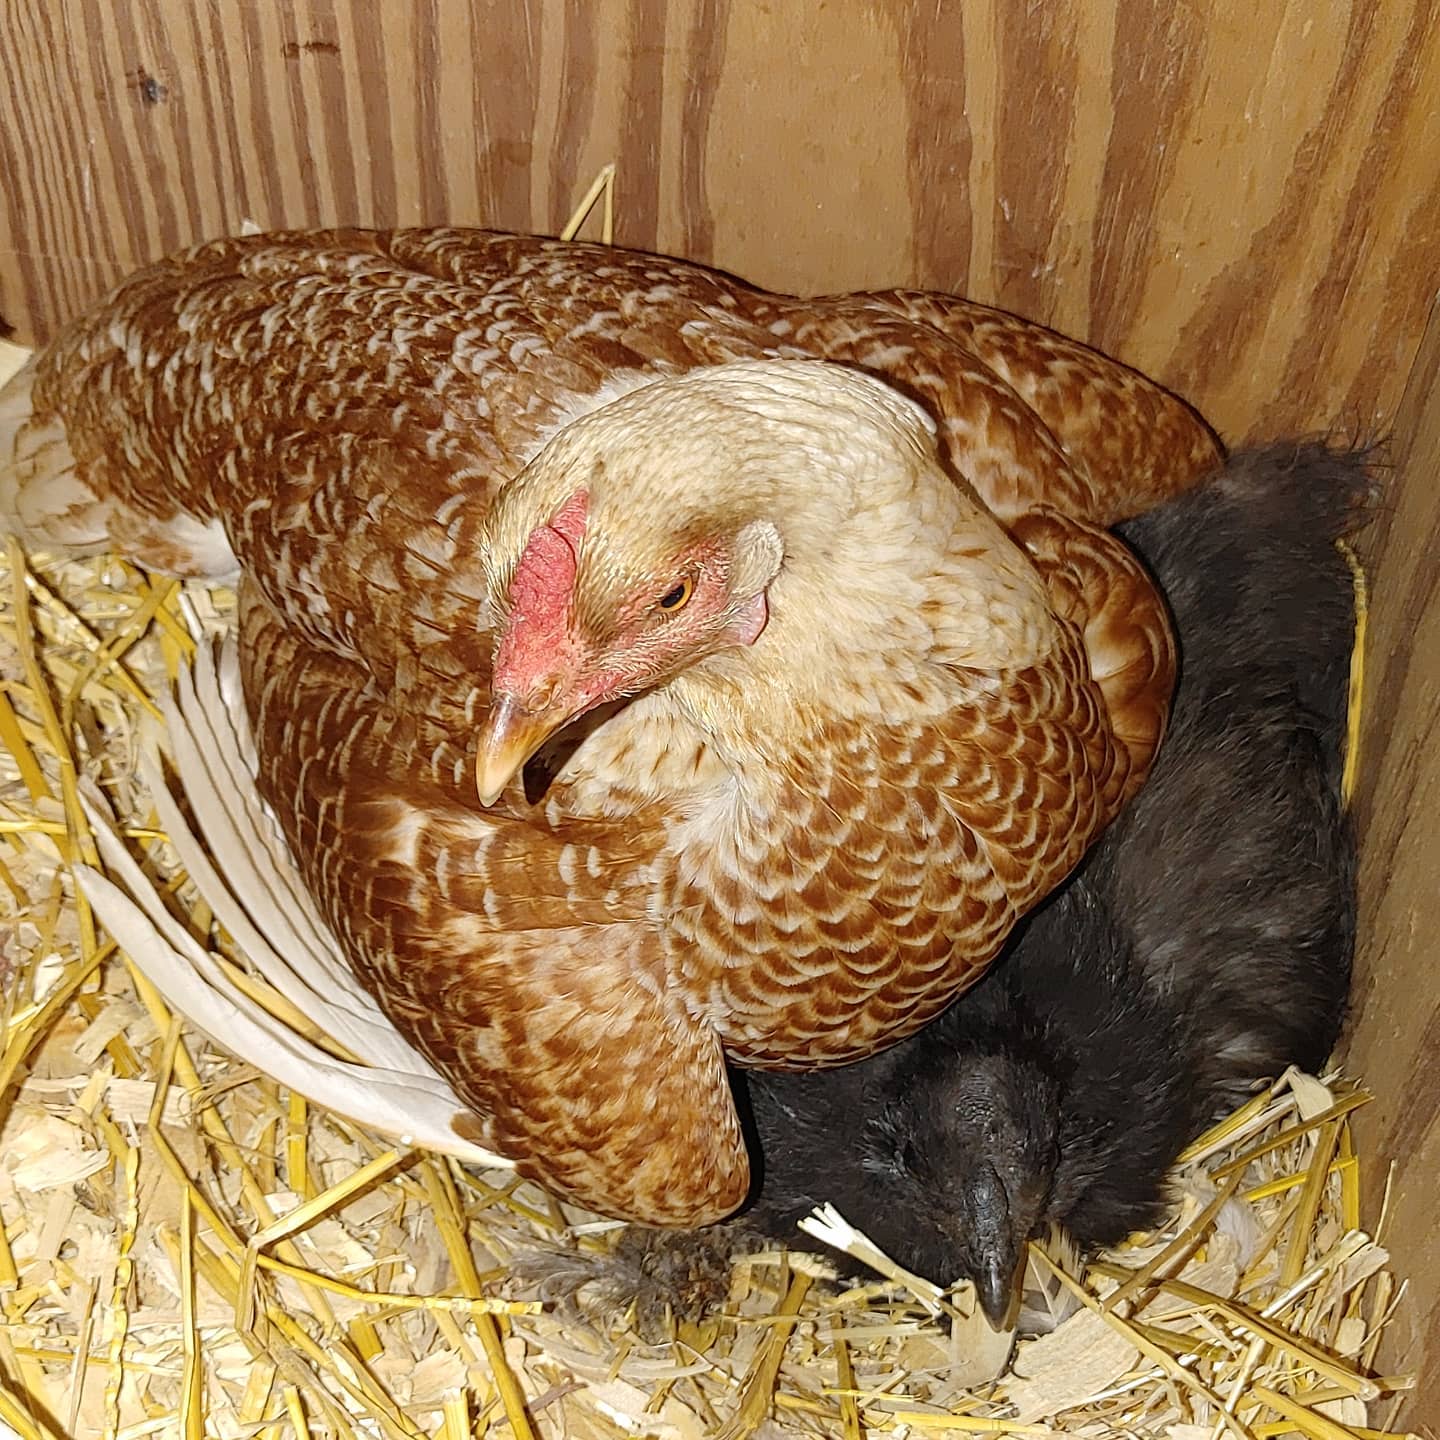 This is one broody idiot sitting on another broody idiot. Bryce always sits on Ruth when she's broody and Ruth is nearly always broody so that works out. They are currently locked out of the coop with Violet, queen of the broodies. I bet it takes 4 days to break them. They seem extra determined this go around.